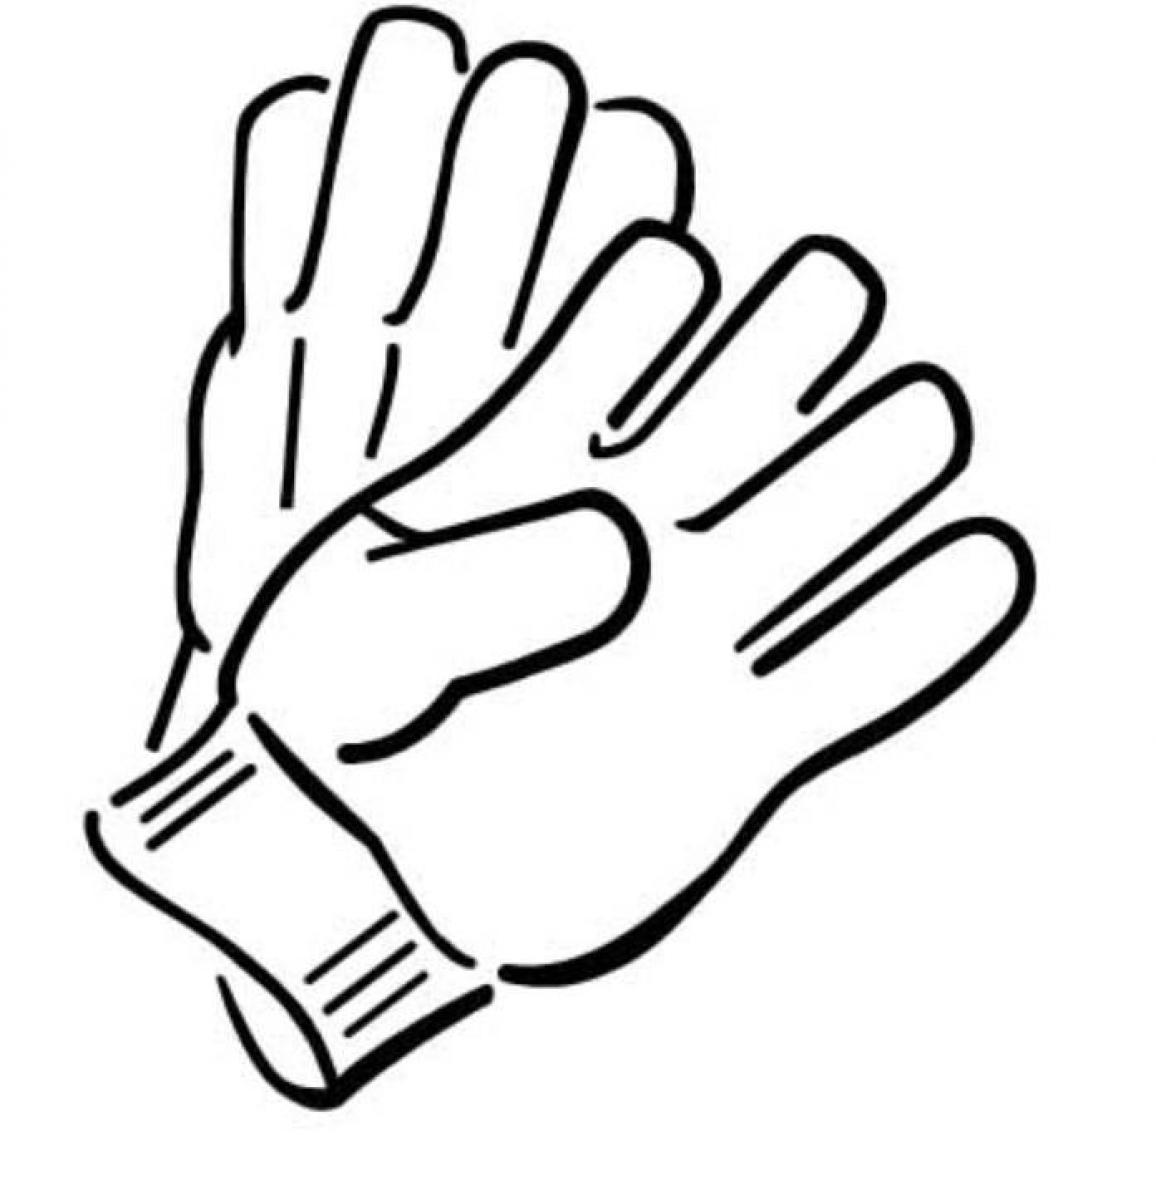 11 Gloves Coloring Pages Free Cliparts That You Can Download To You